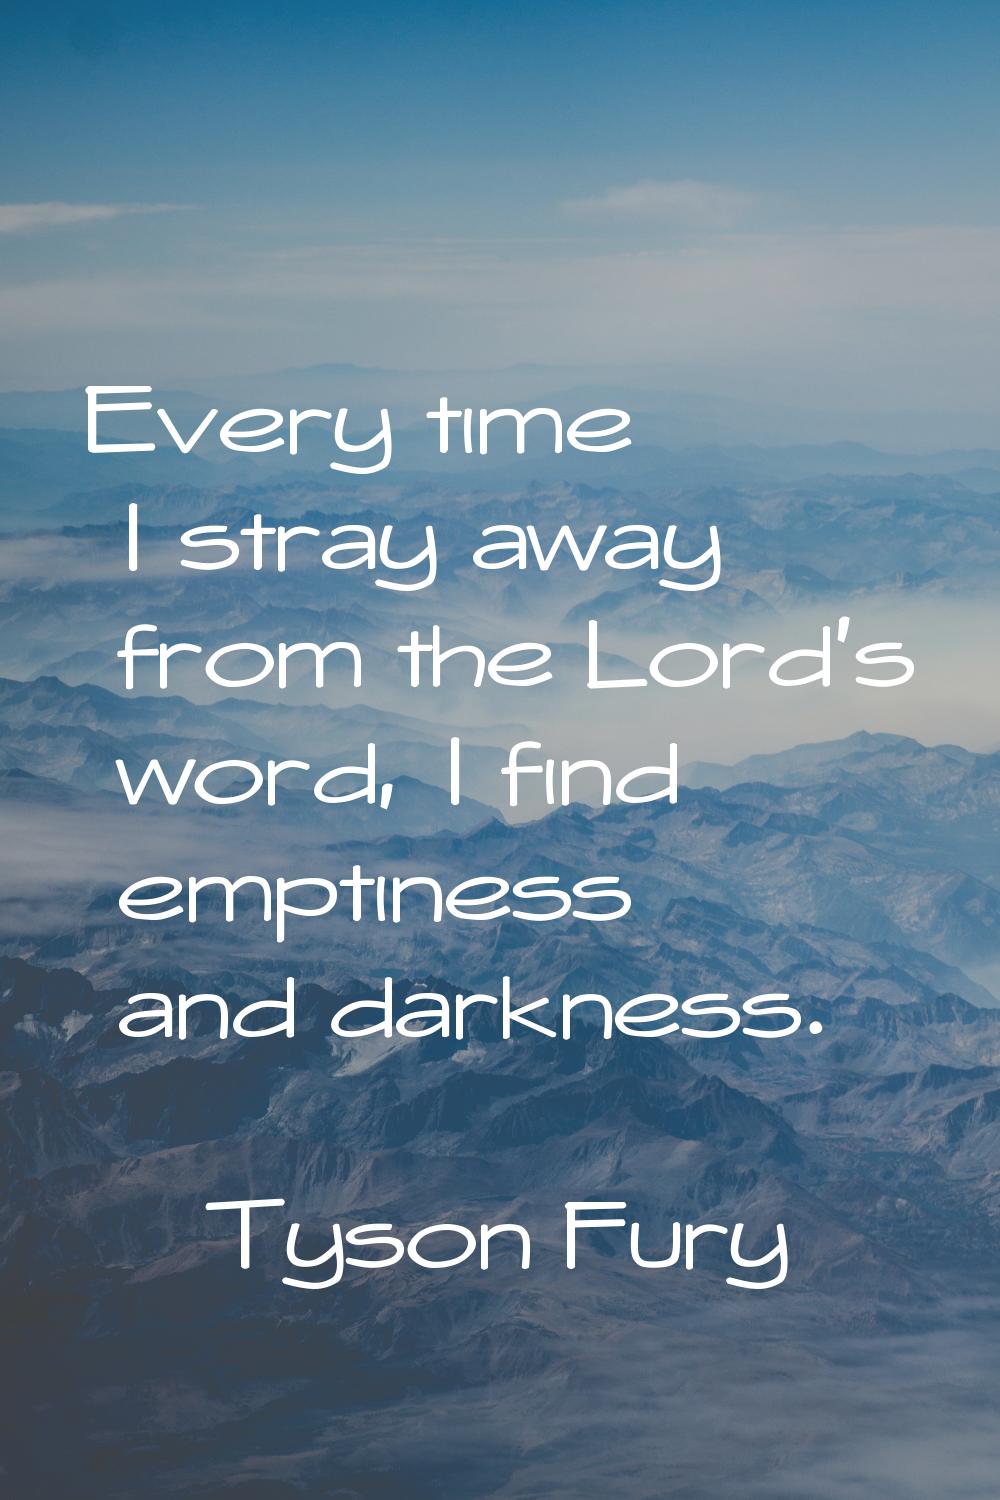 Every time I stray away from the Lord's word, I find emptiness and darkness.